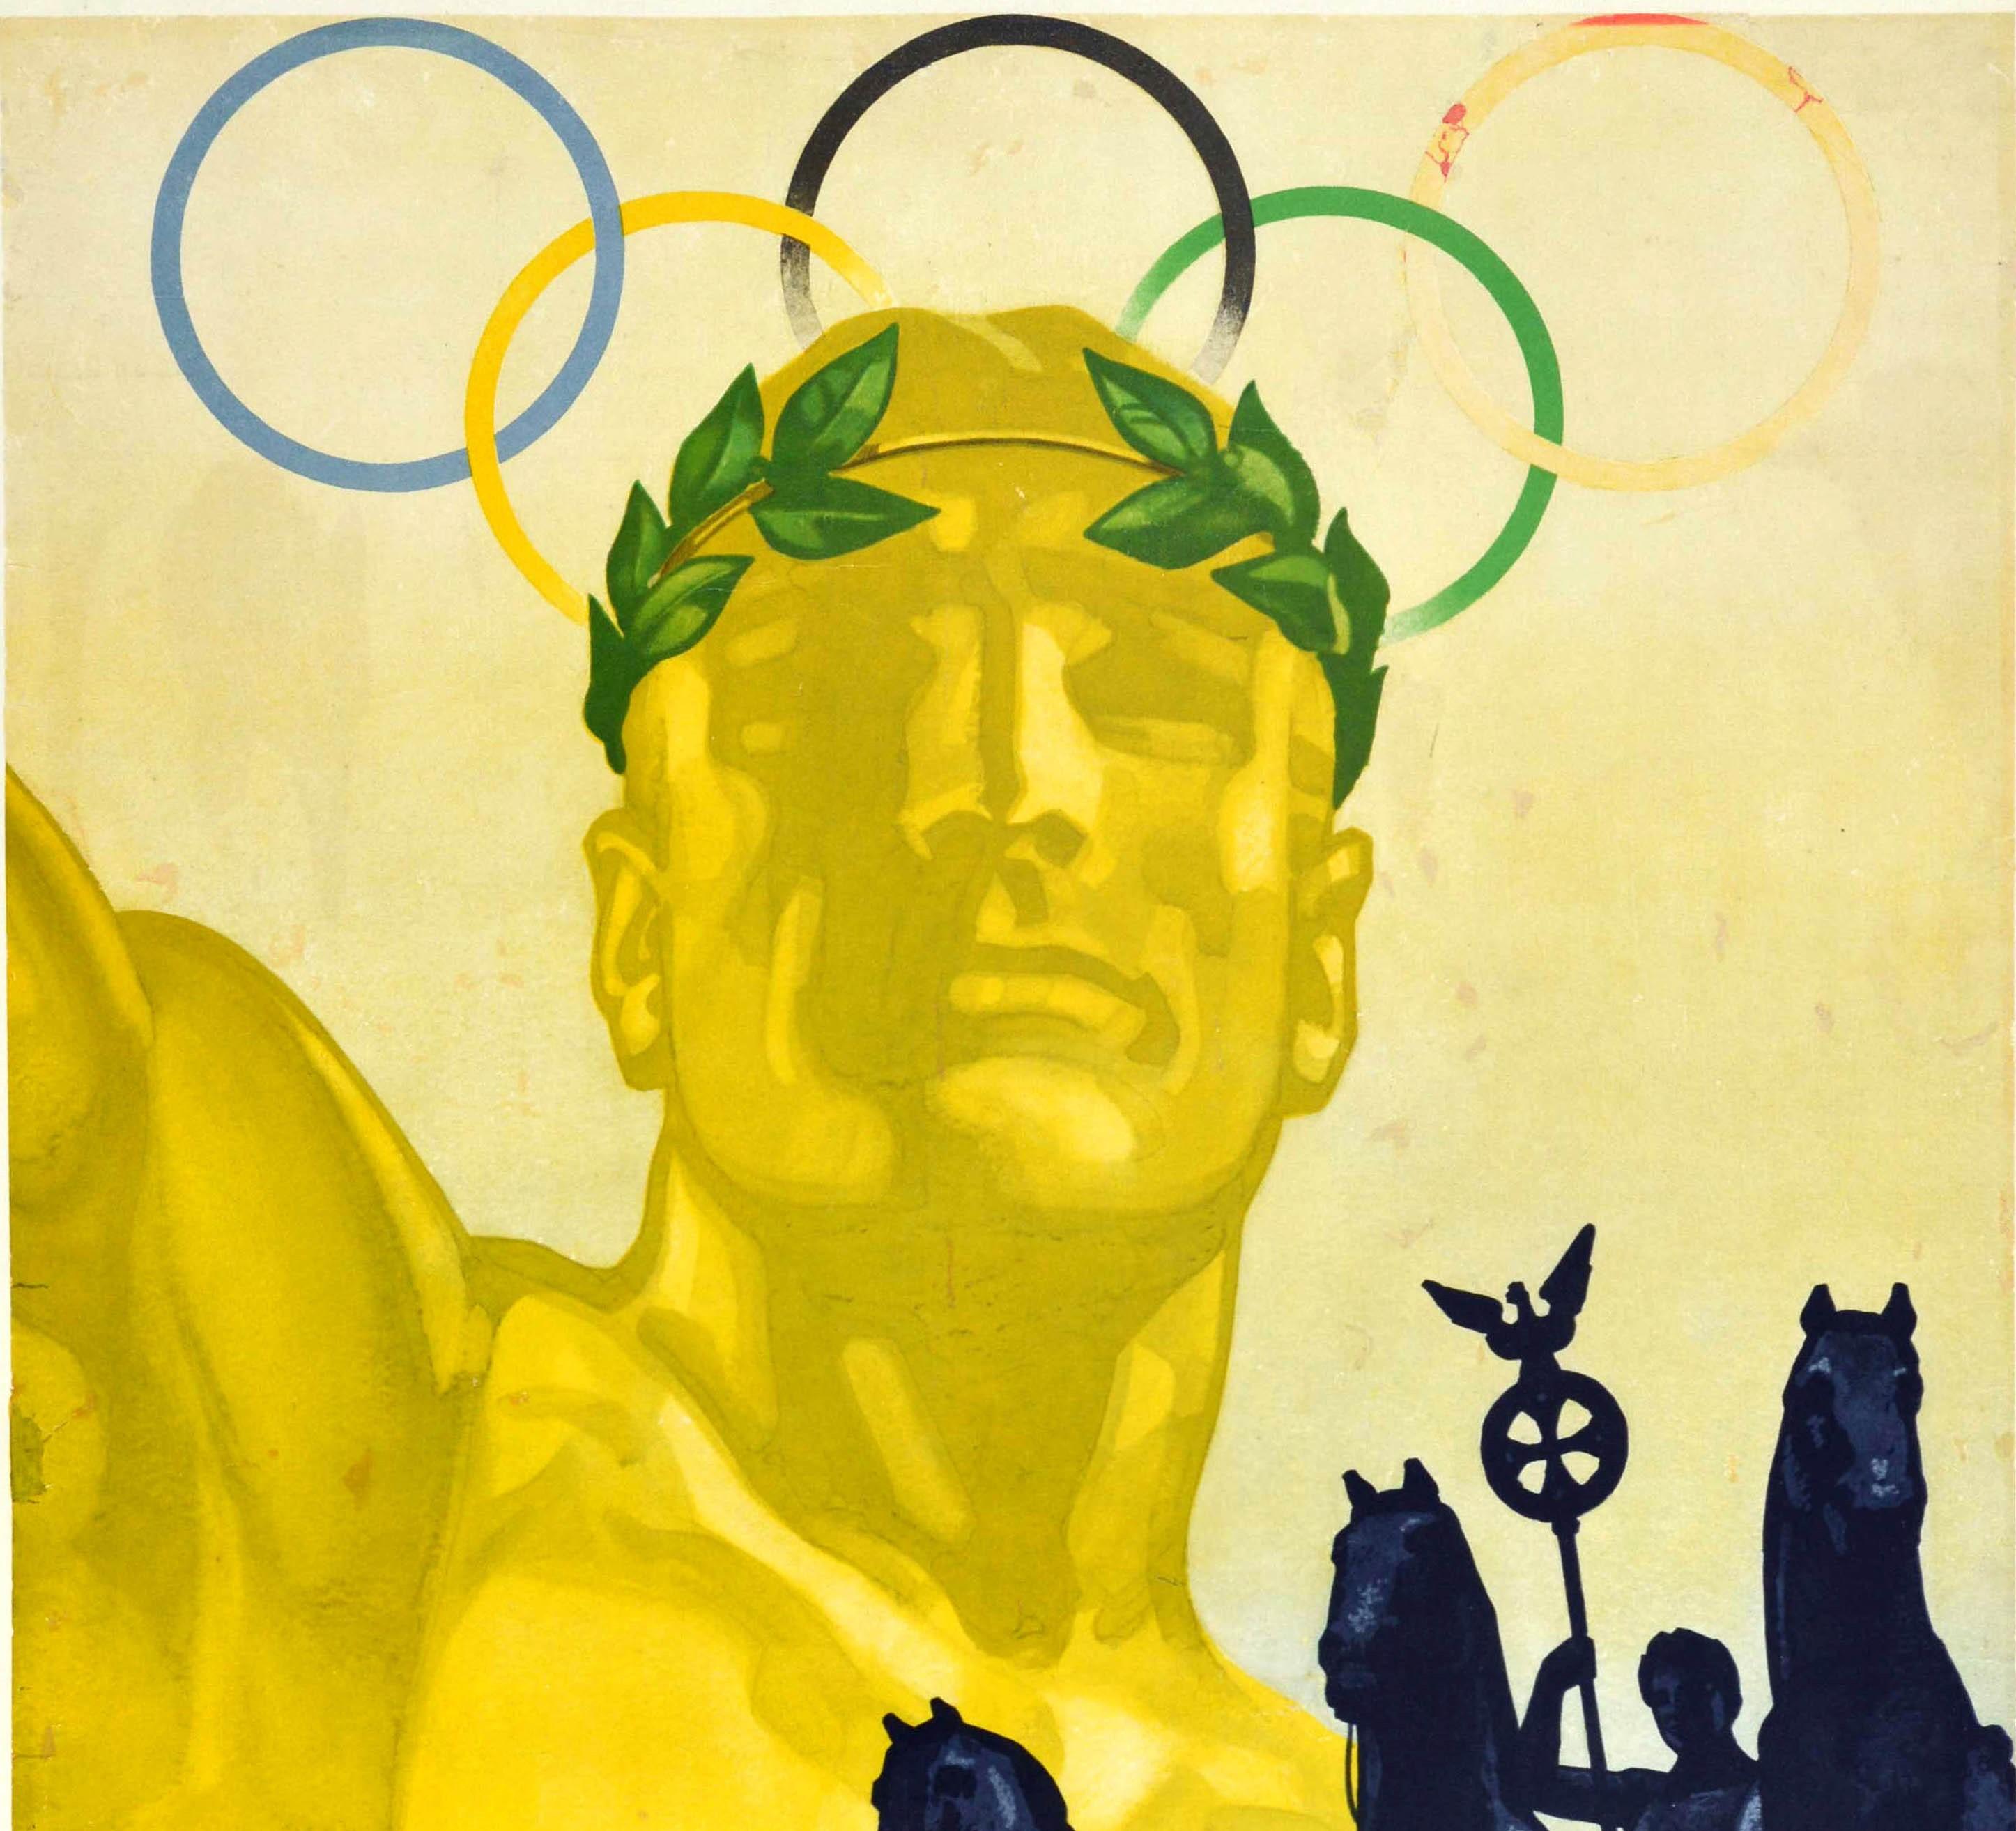 Original vintage Summer Olympic games poster for the 1936 Olympic Games held in Berlin from 1-16 August published by the German Railways Head Office for Tourist Traffic and the Propaganda Committee for the Olympic Games. Stunning classical